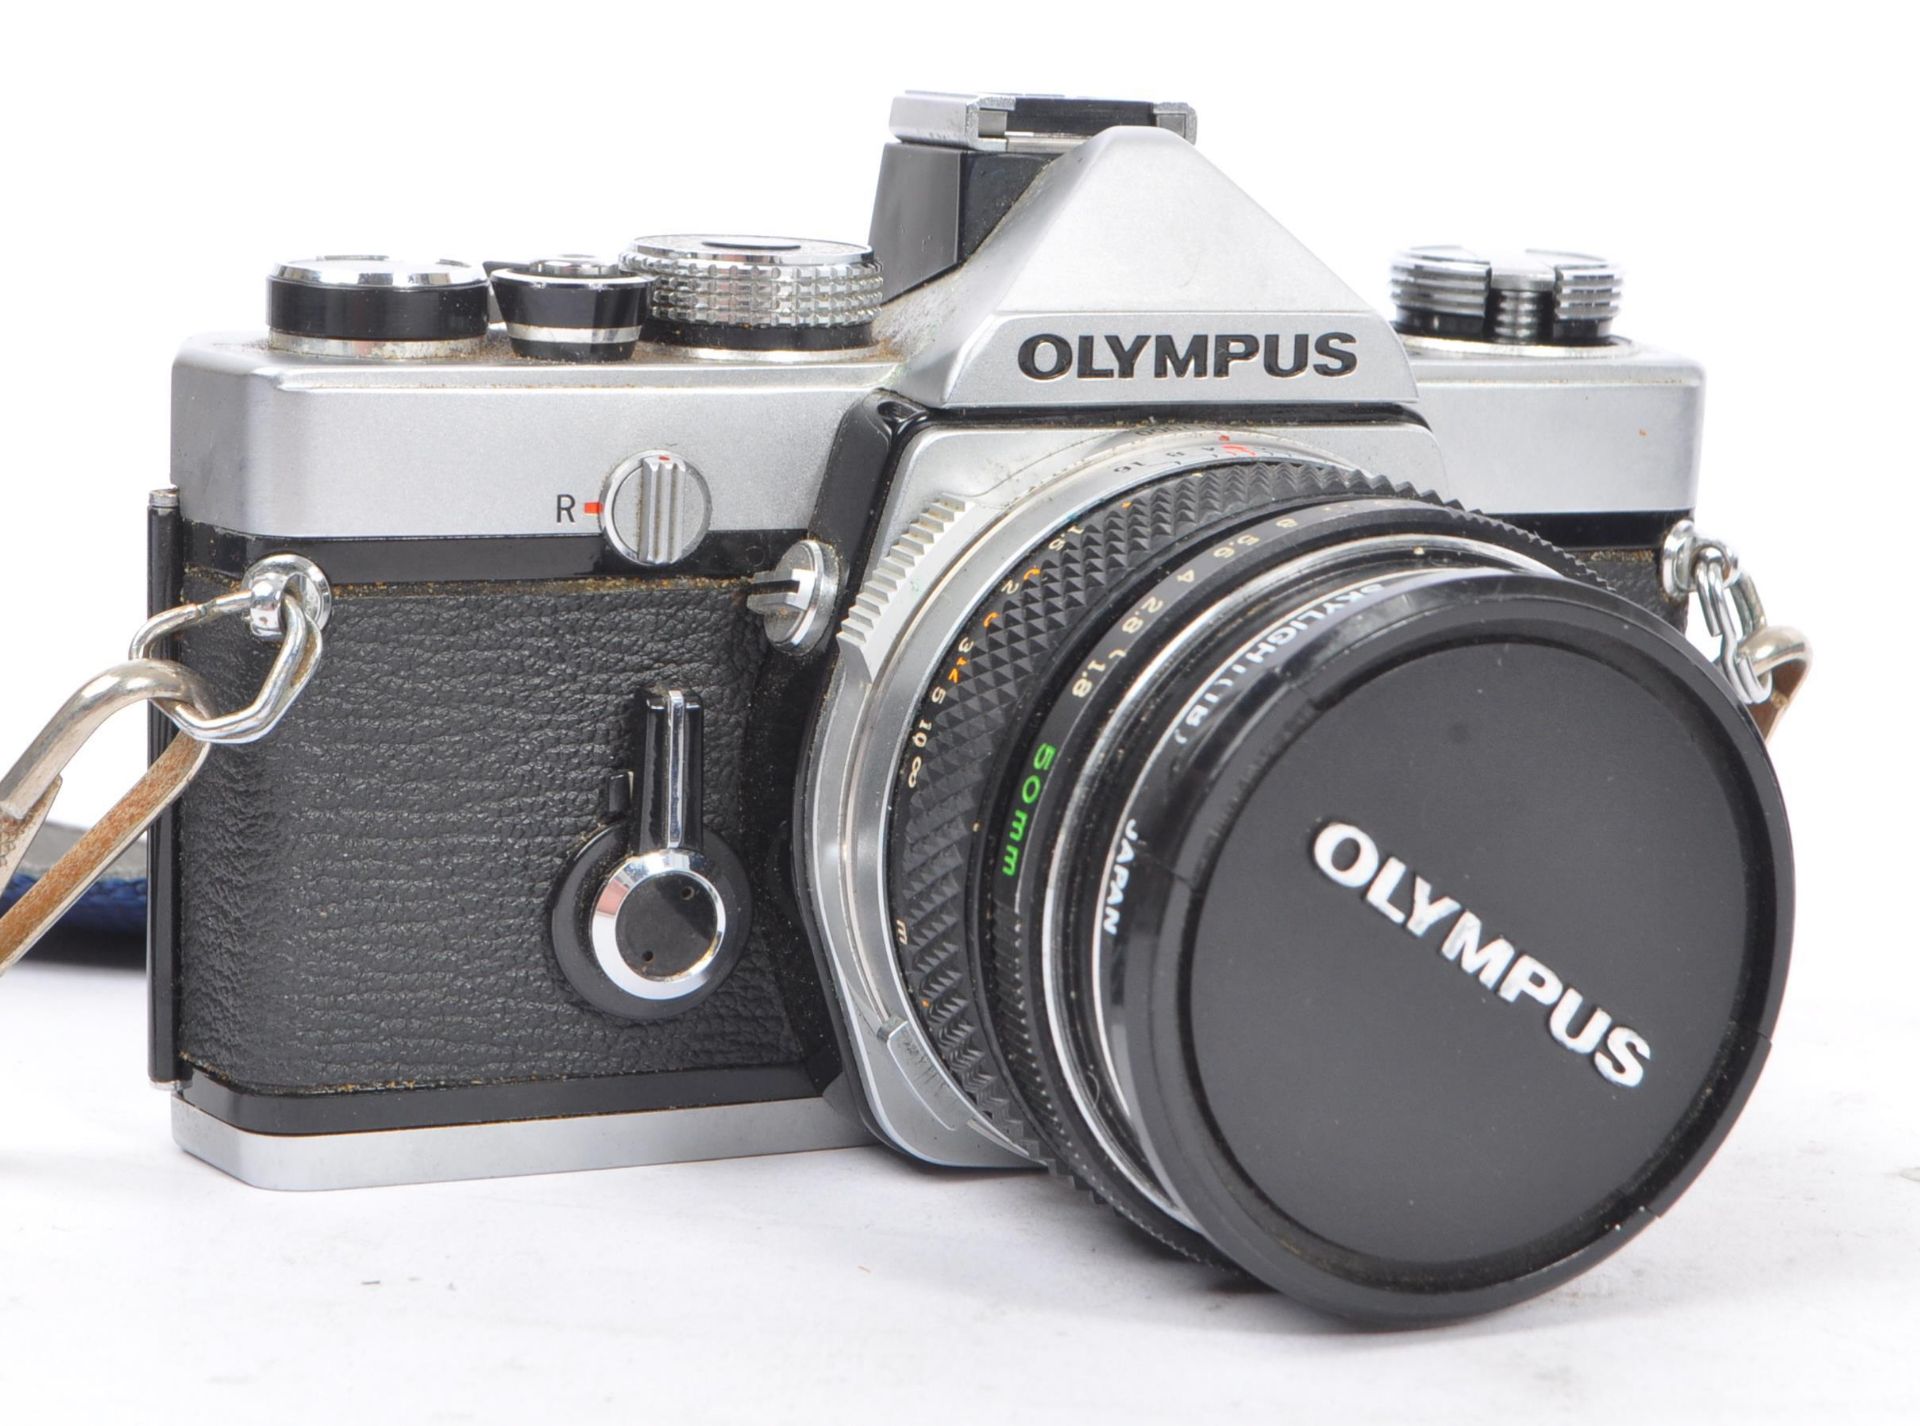 1970S OLYMPUS OM1 MD 35MM SLR AND LENSES - Image 2 of 7